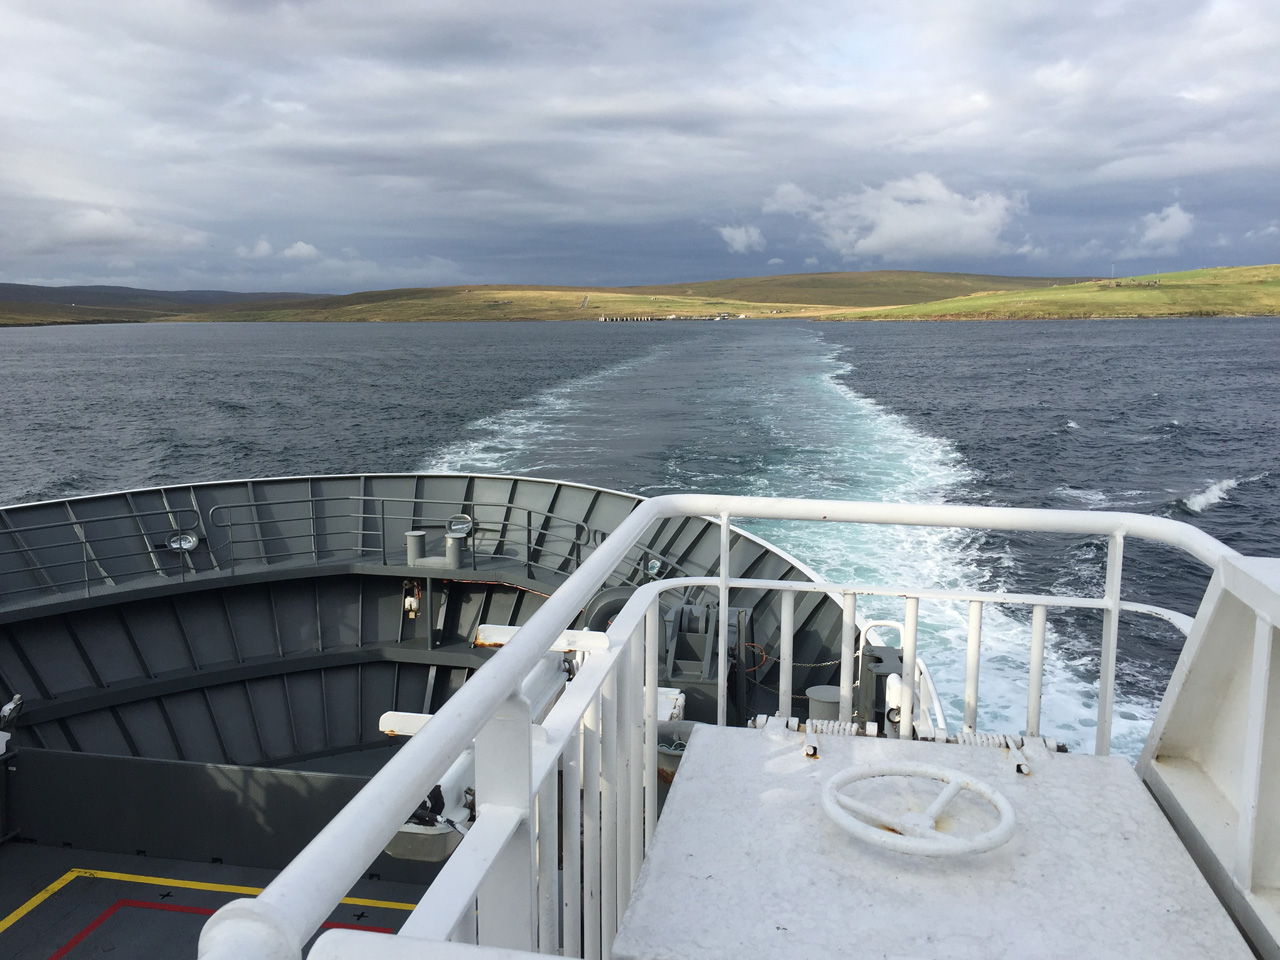 Ferry from Toft on Shetland Mainland to Ulsta on Yell.